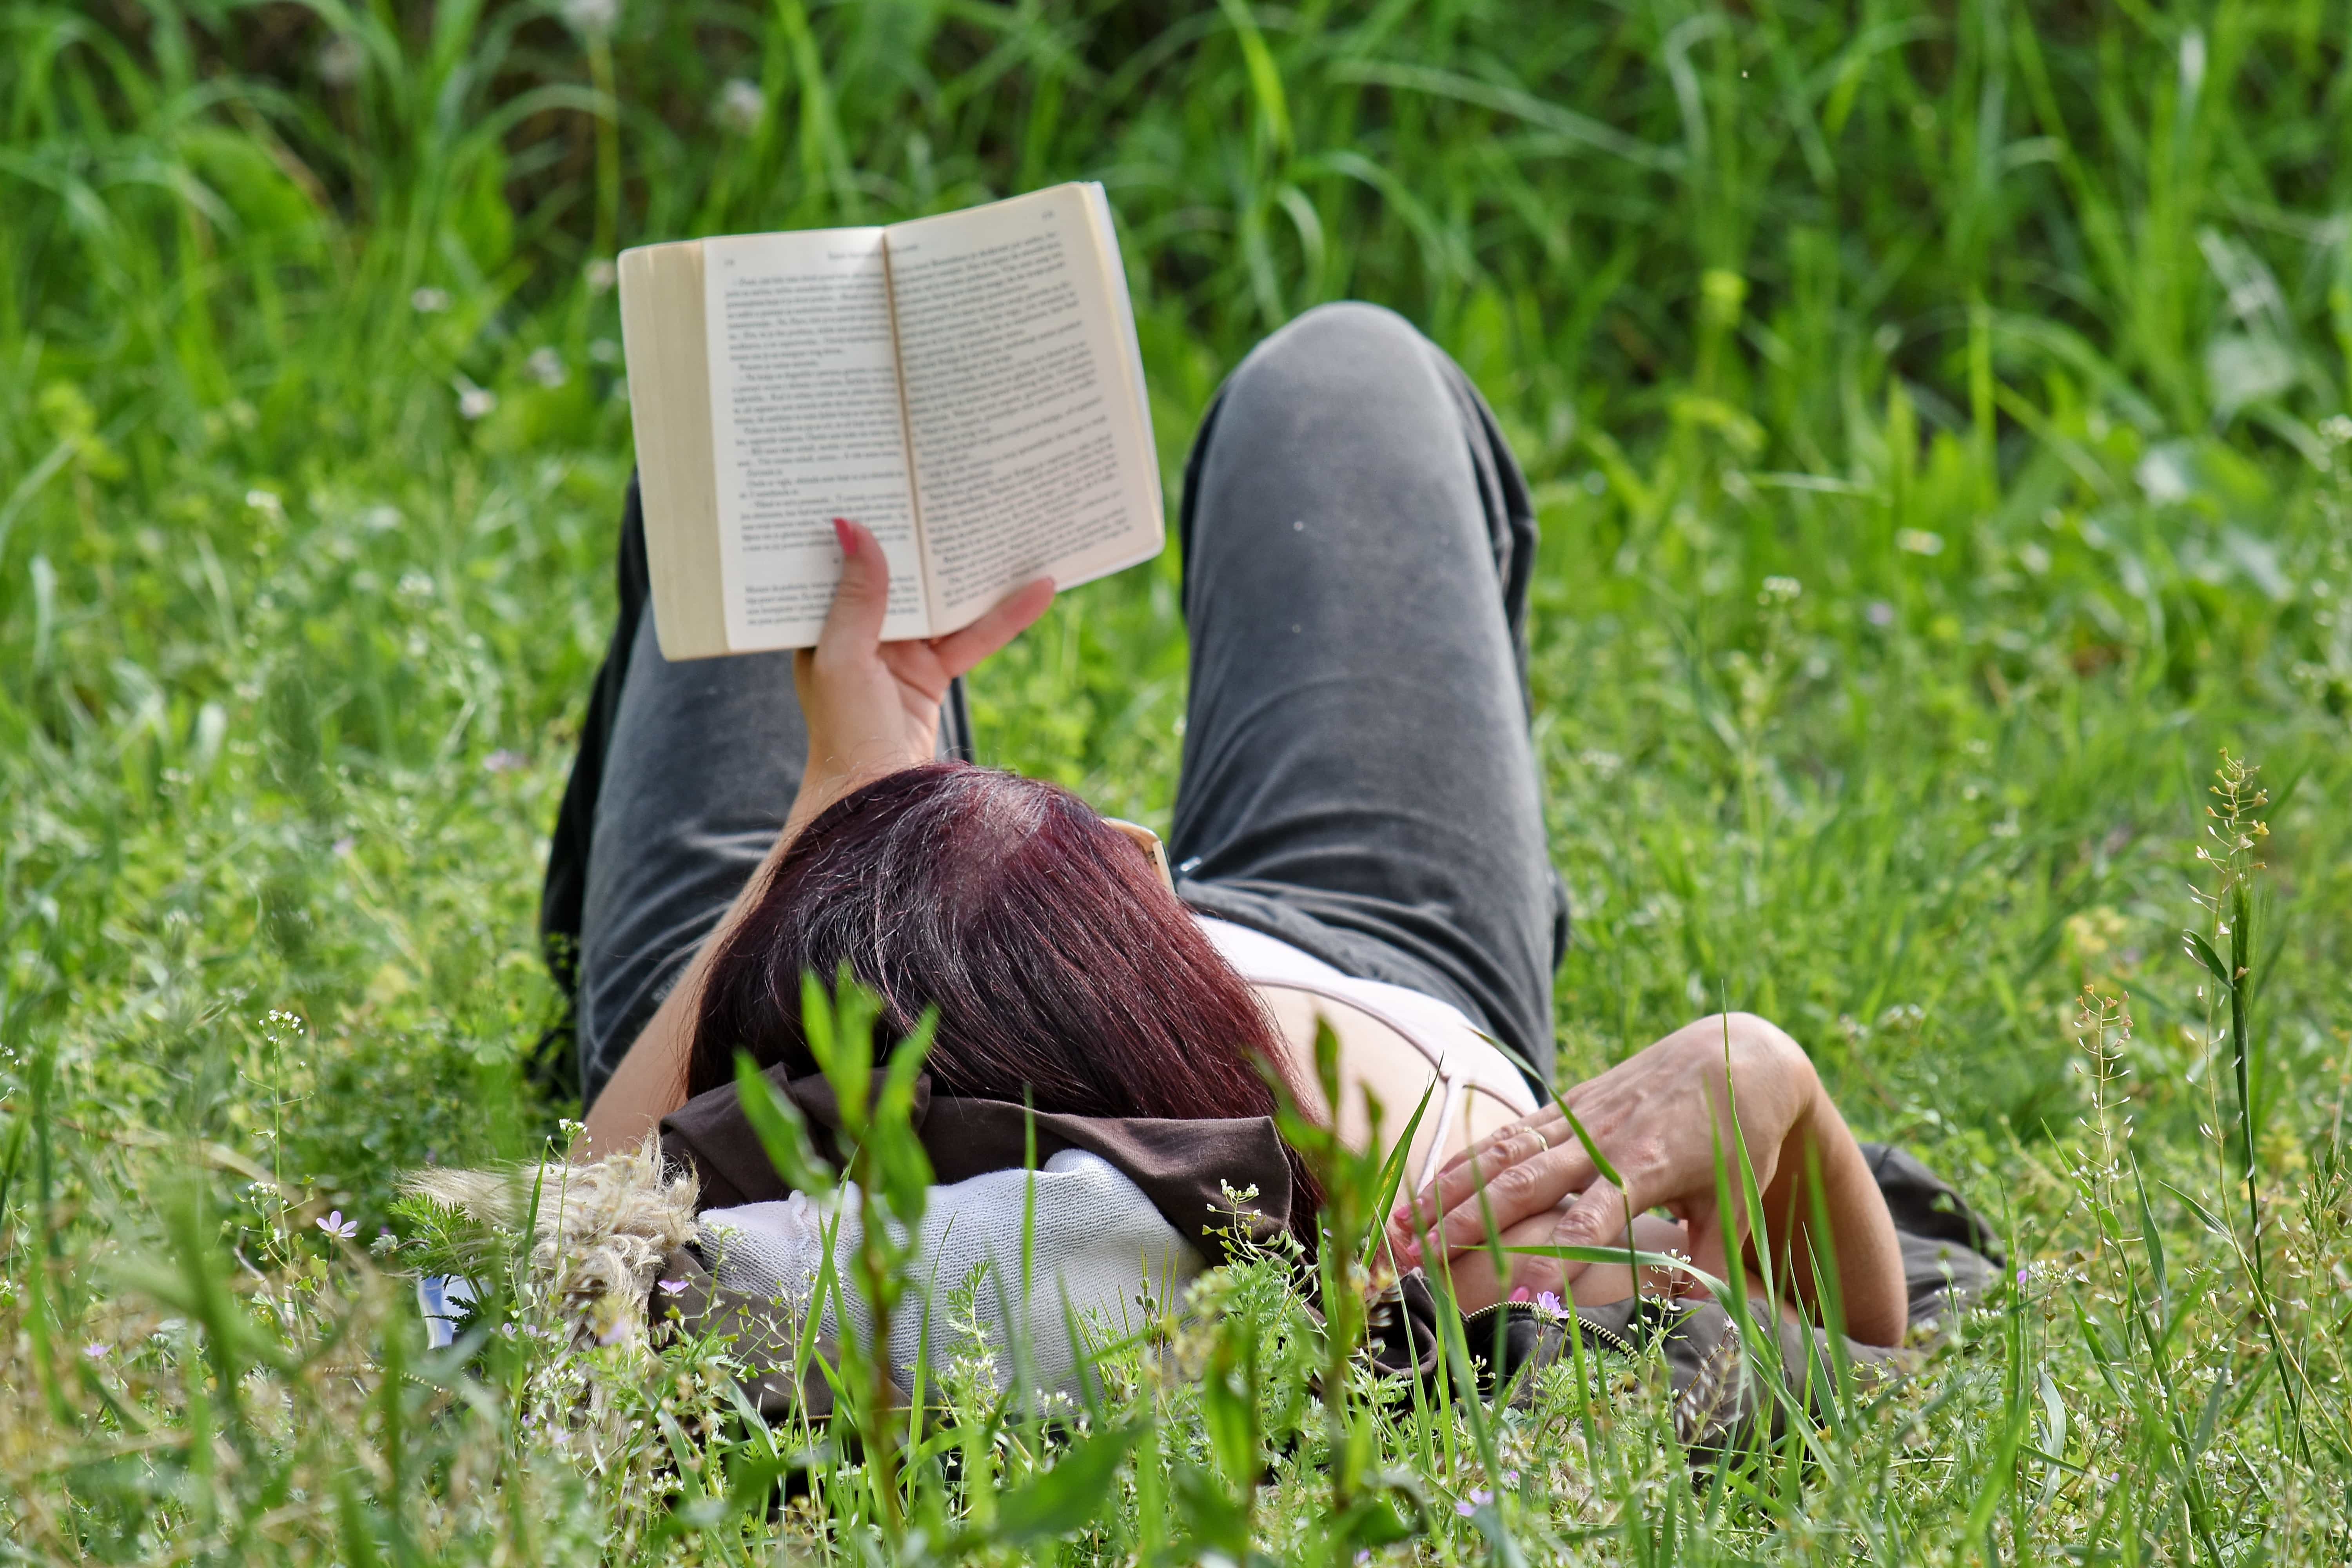 Free picture: book, grass, reading, relaxation, summer, woman, park